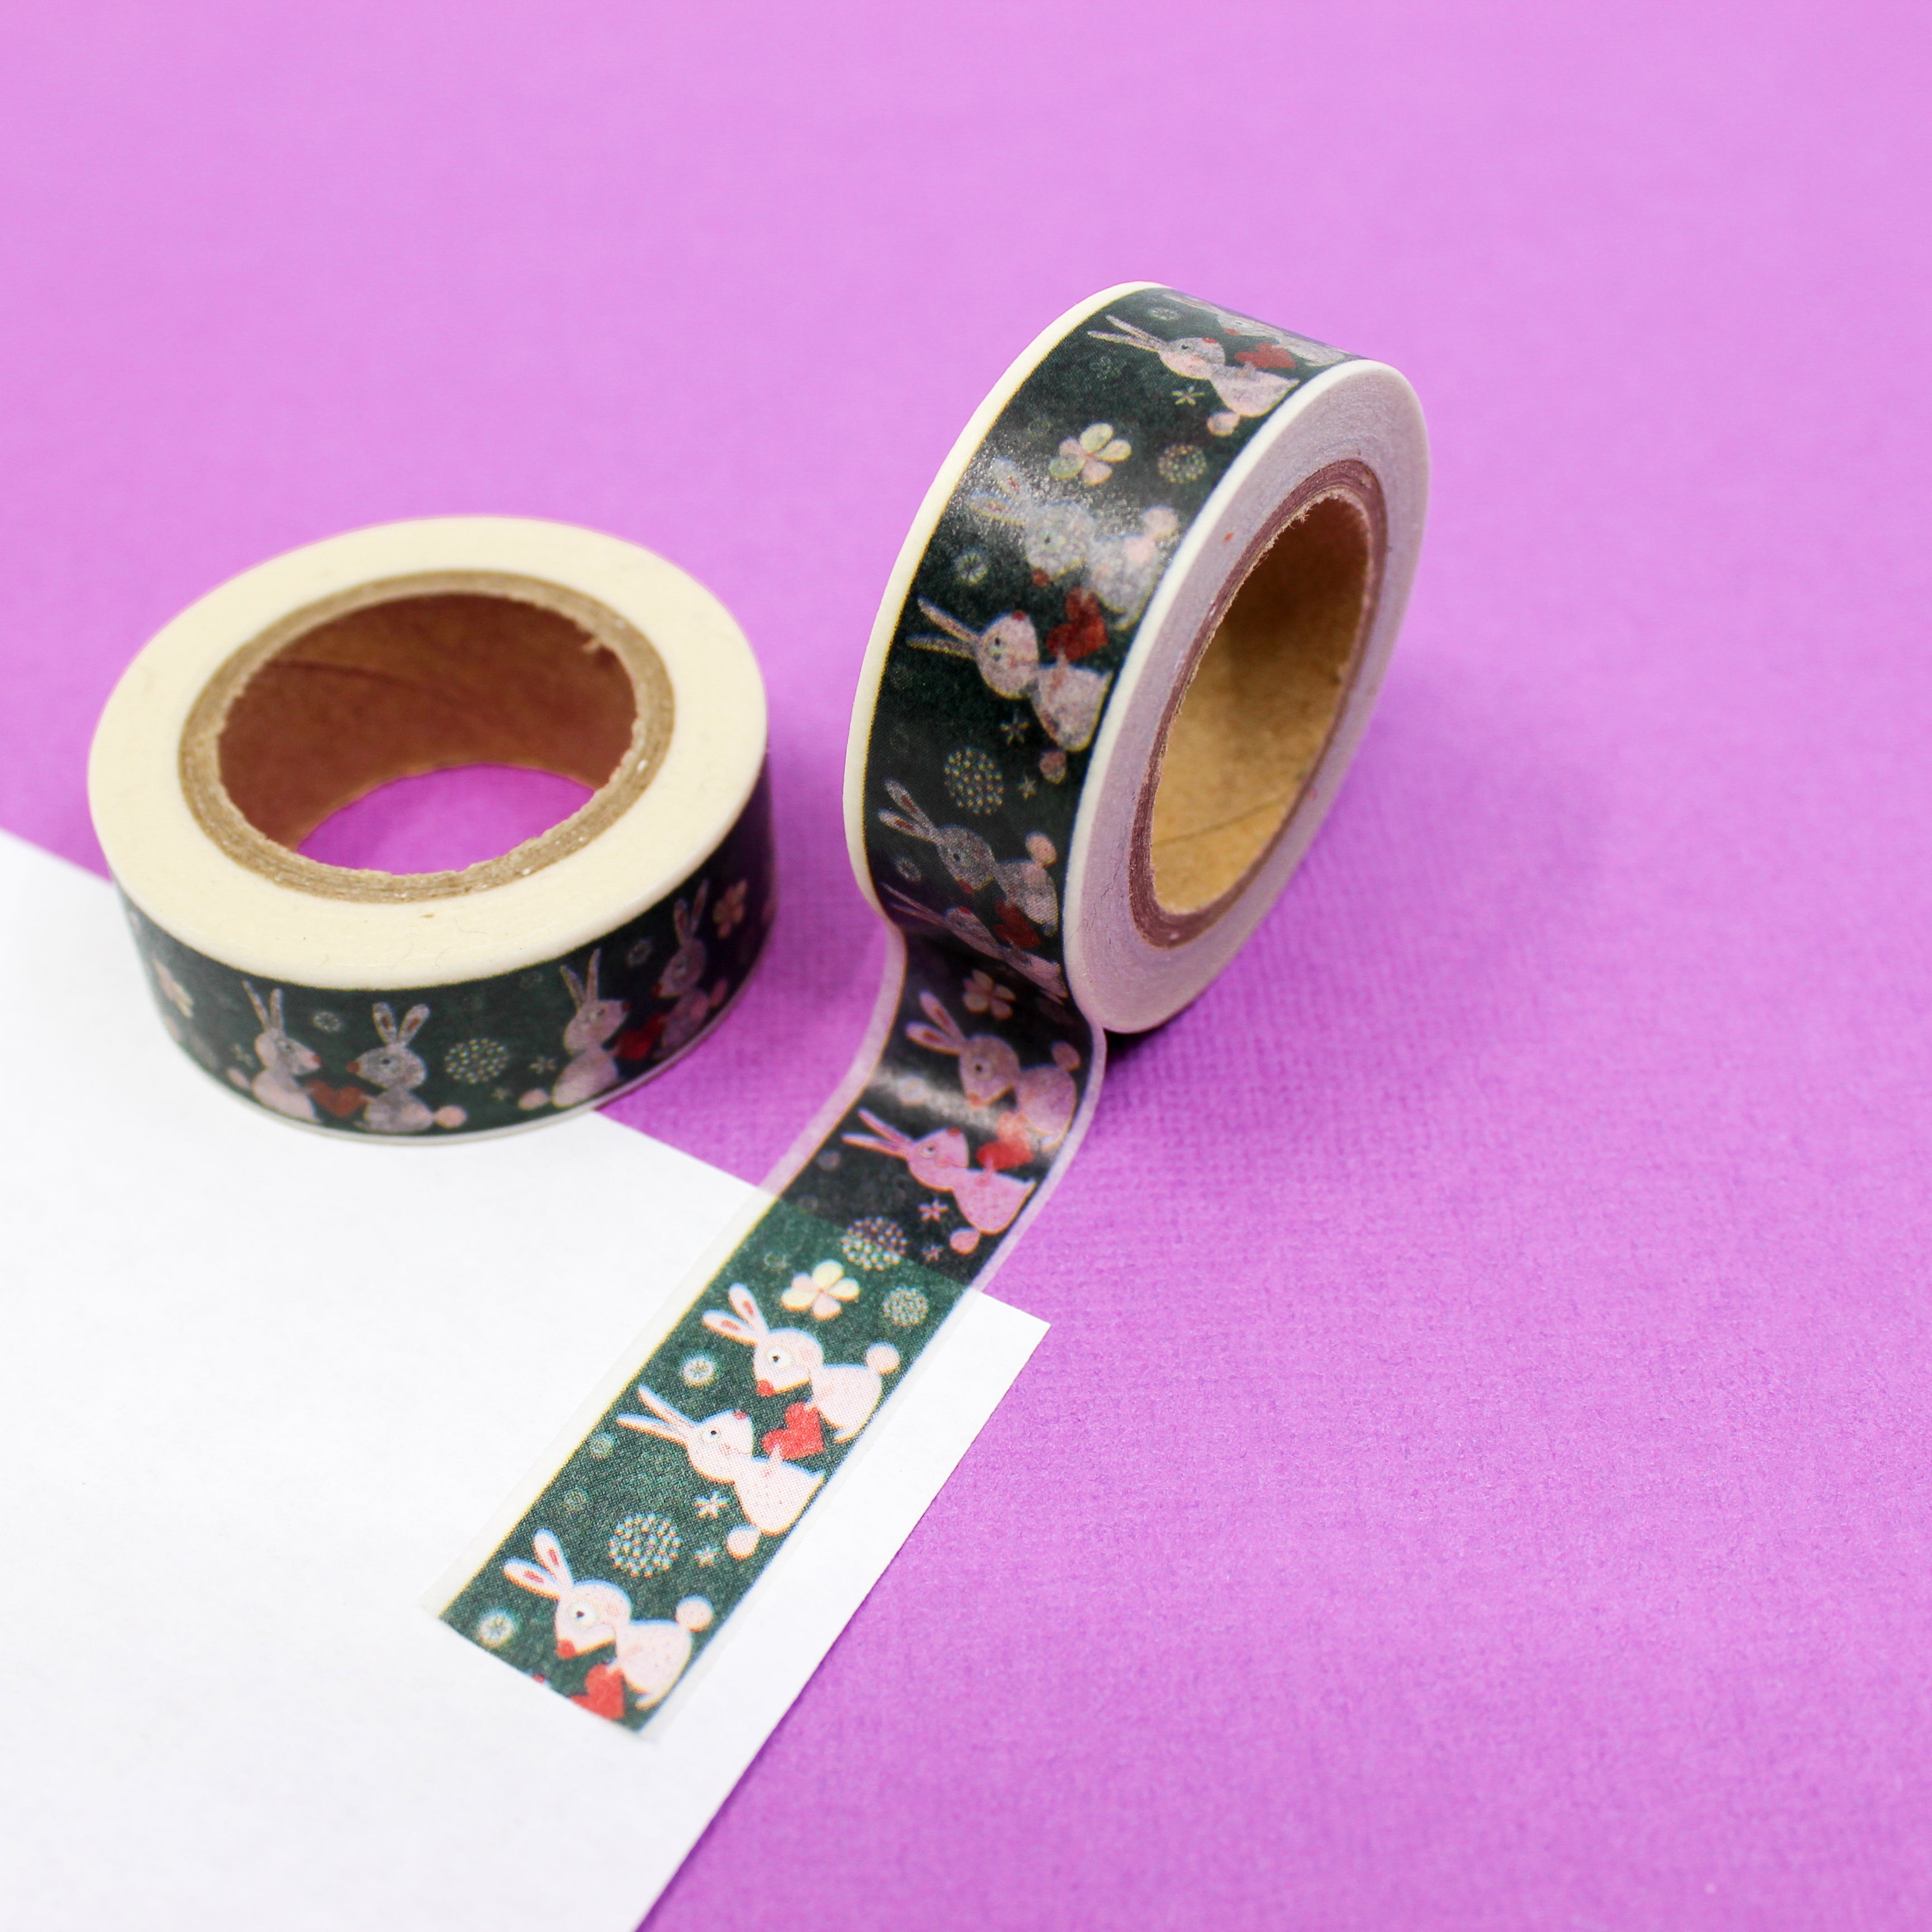 This is a couple of white rabbits with a heart in a green foil-themed washi tape from BBB Supplies Craft Shop